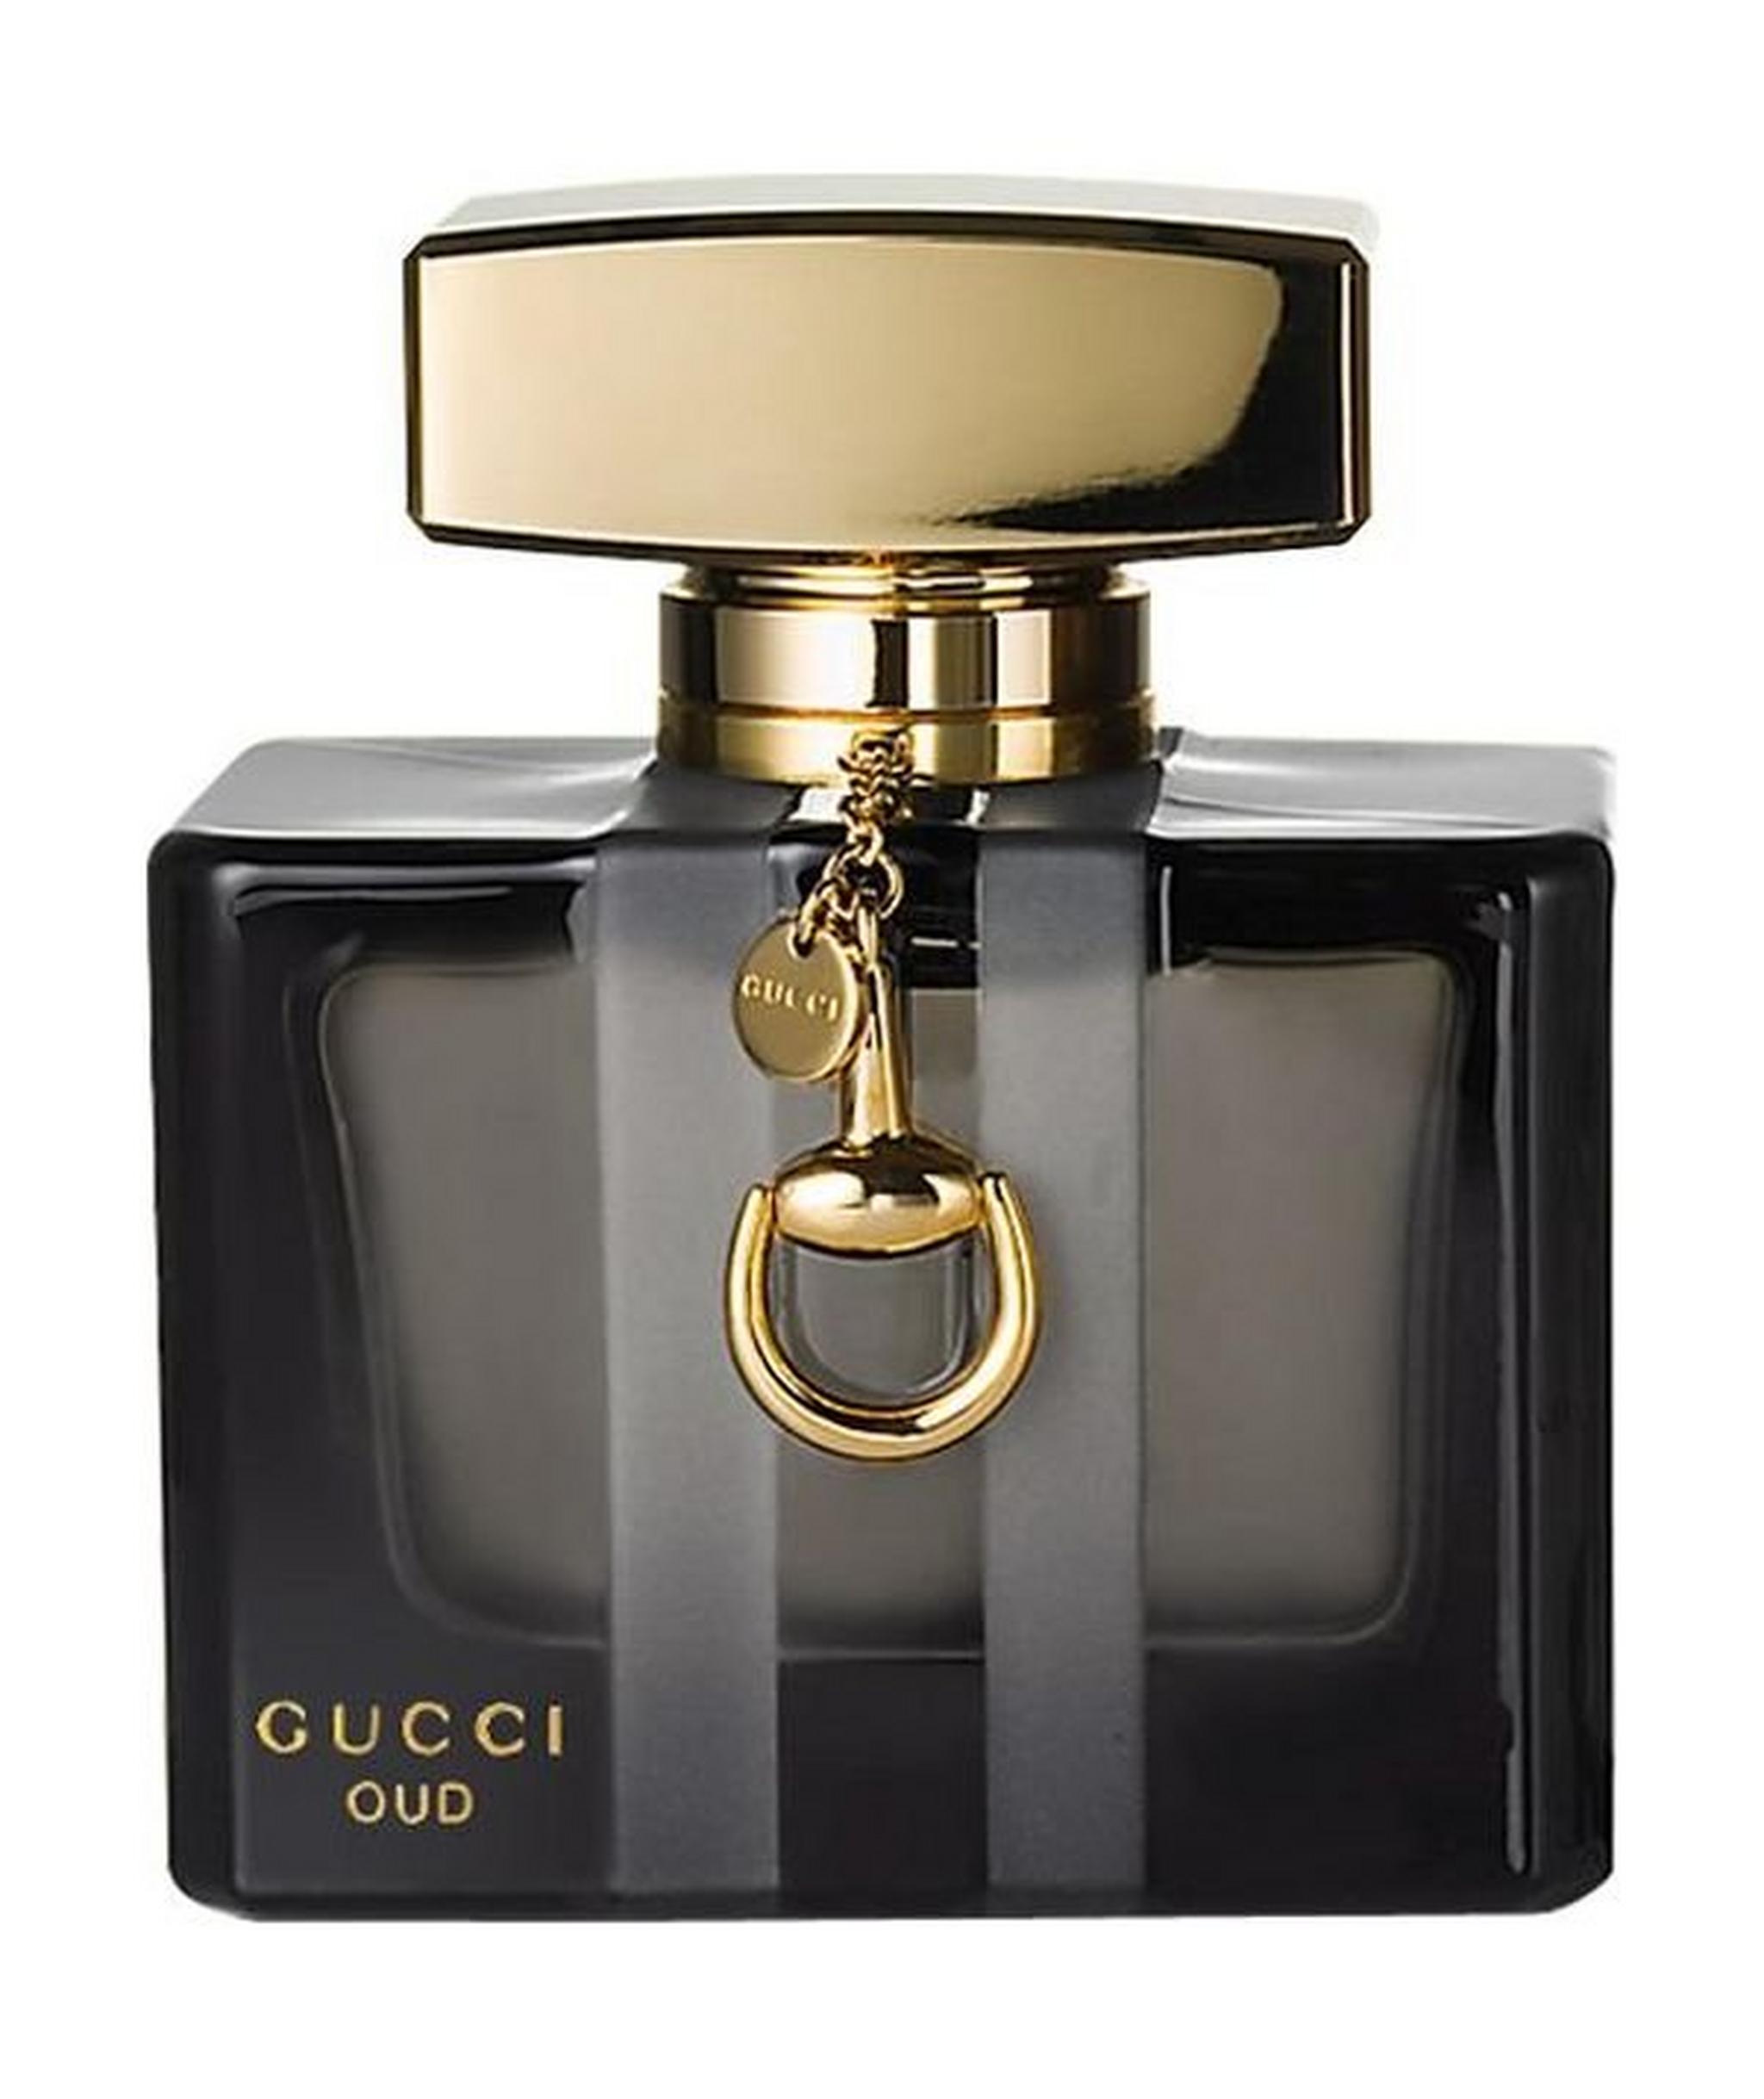 Gucci Oud EDP Perfume for Men and Women 75ml